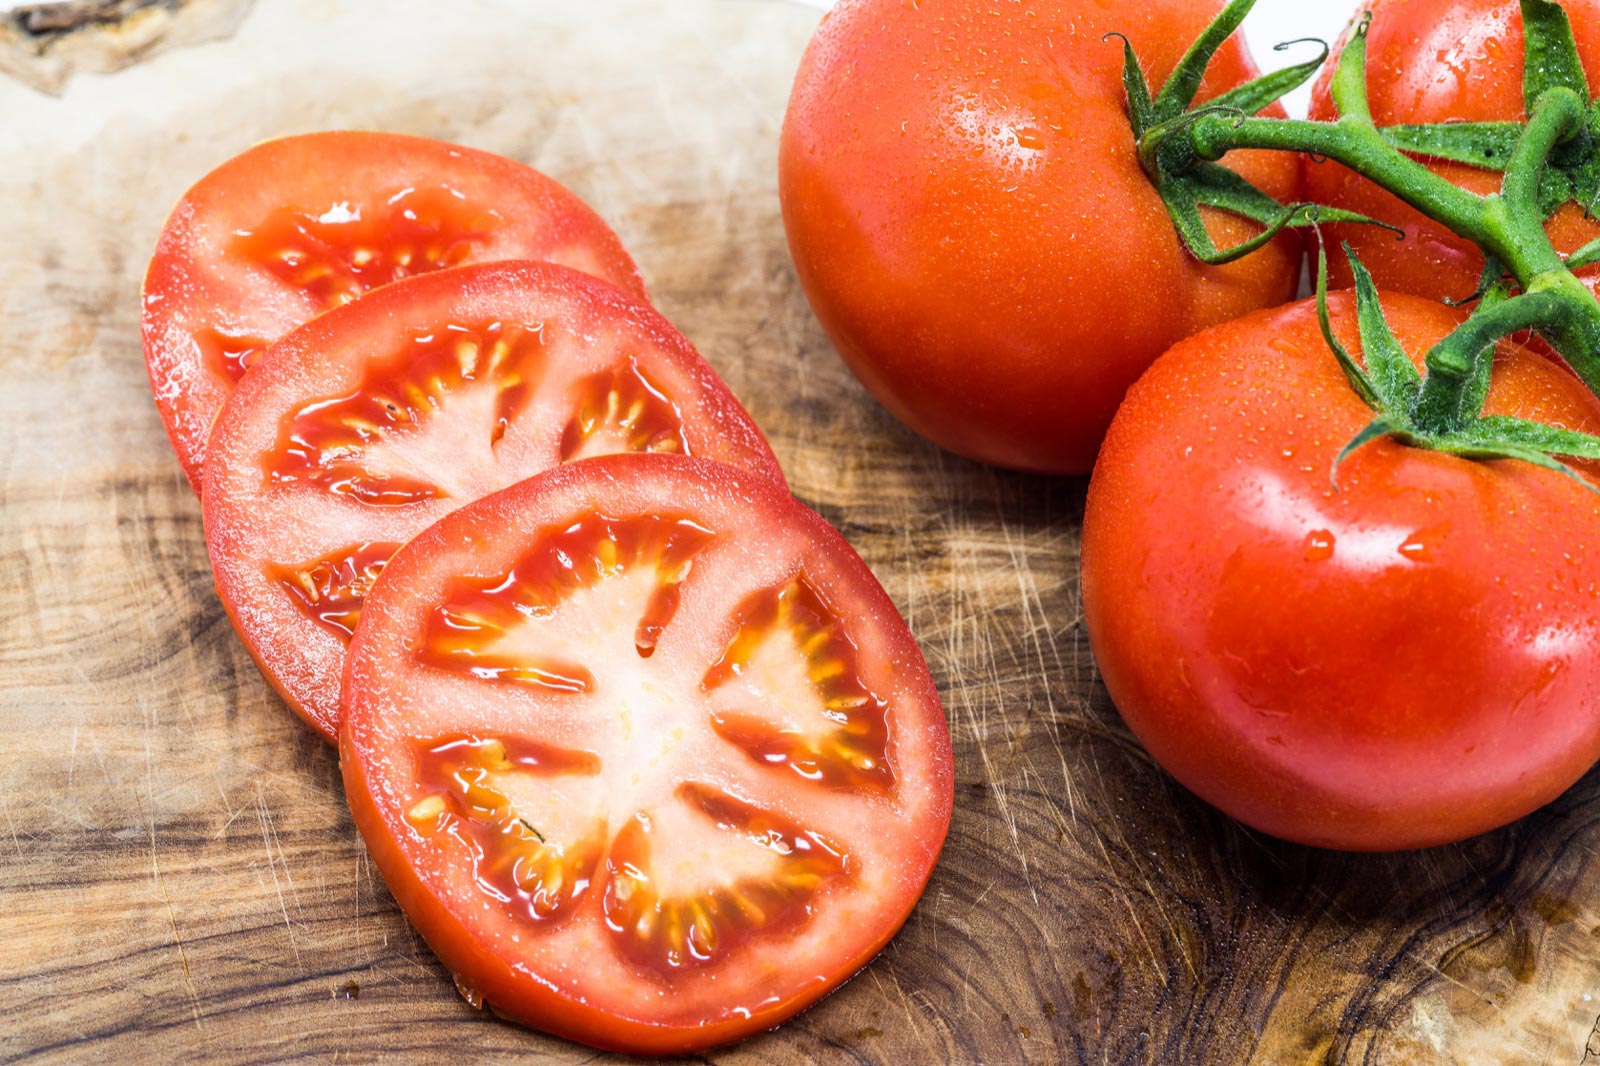 🍓 Sorry, But If You Can’t Pass This Plural Word Test, You Can Never Have Fruits Again Tomatoes